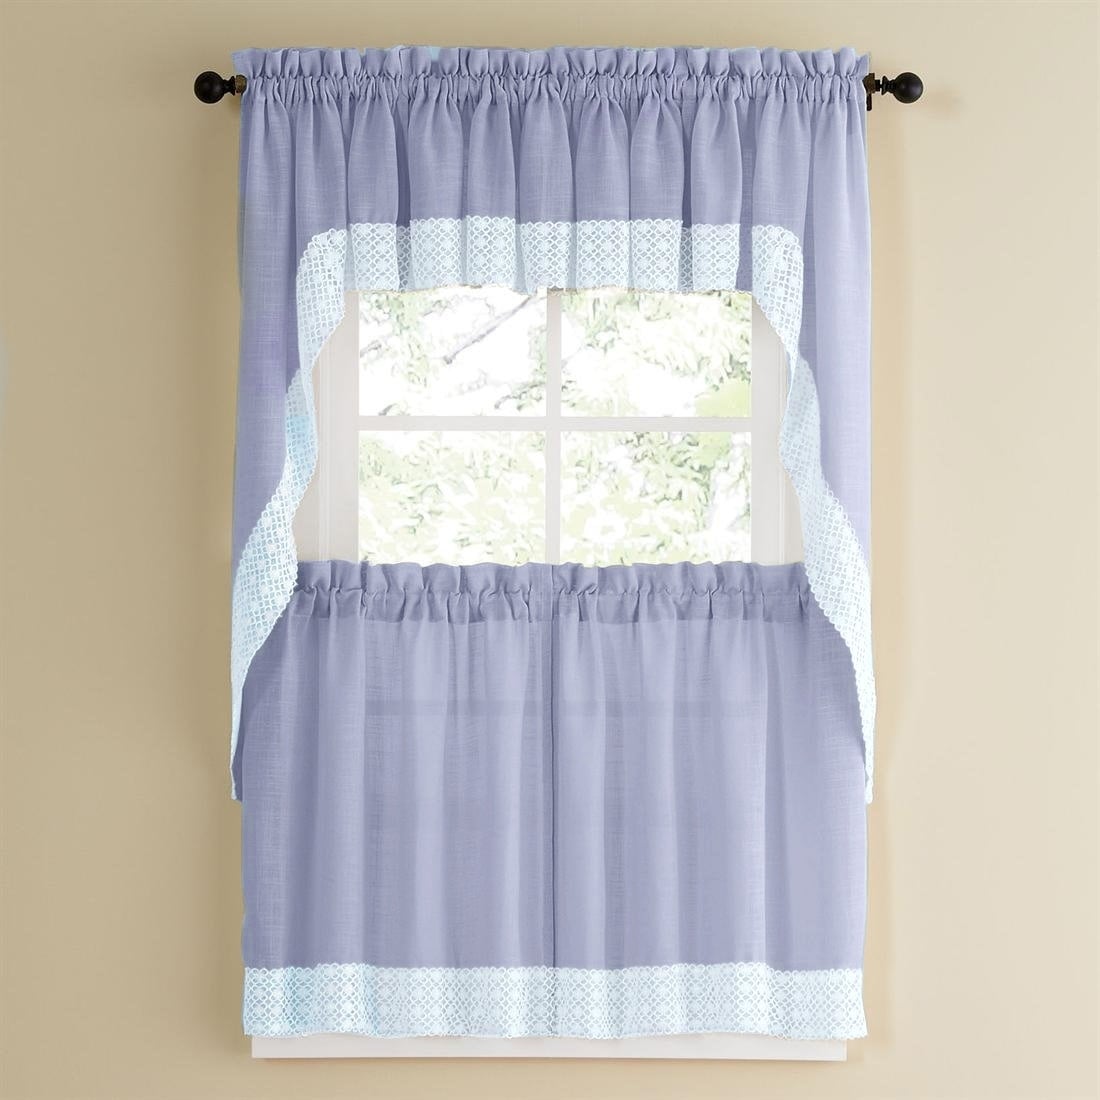 Blue Country Style Kitchen Curtains With White Daisy Lace Accent Overstock 10195262 Tier Pair 24x60